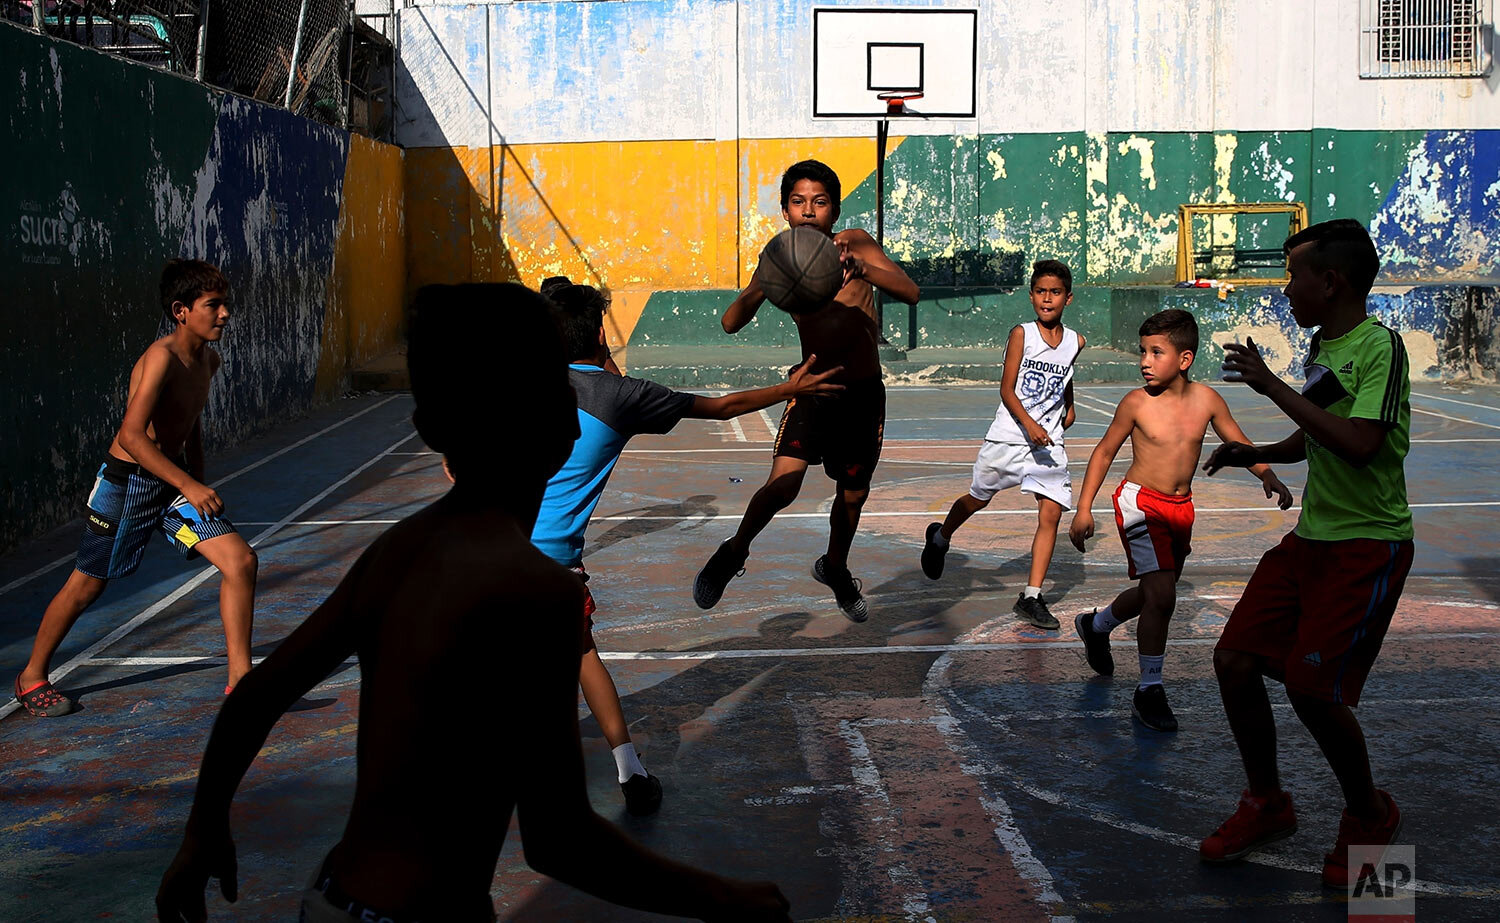  A group of boys play basketball at the Petare shantytown, in Caracas, Venezuela, on May 16, 2019. (AP Photo/Martin Mejia) 